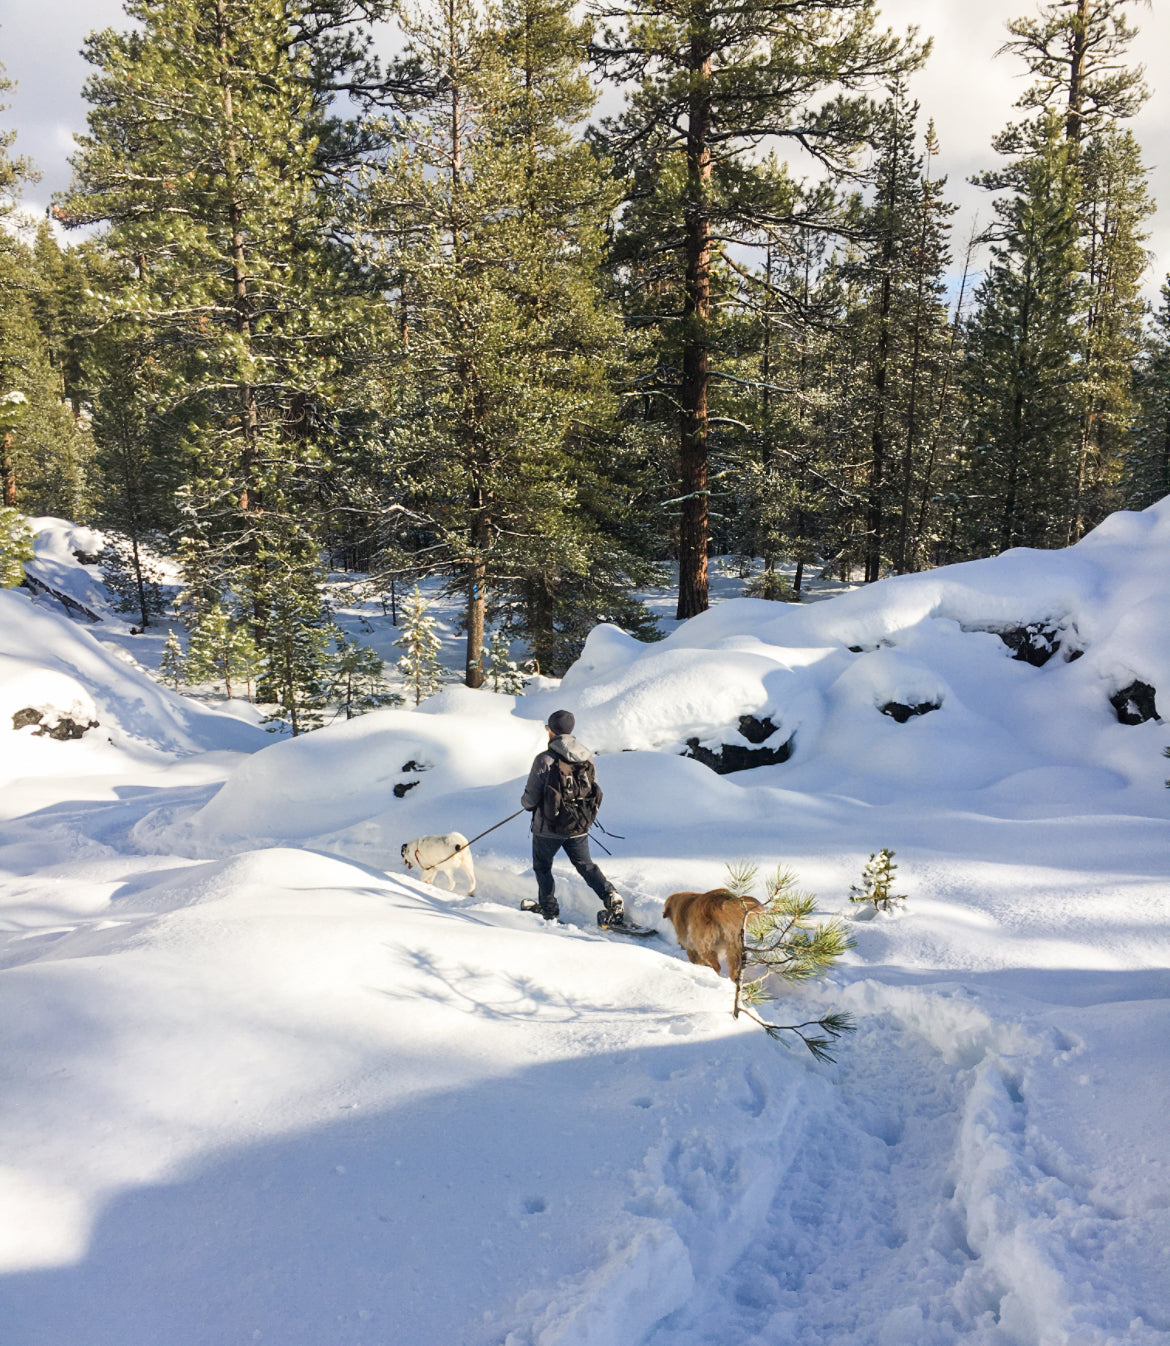 Two dogs walk through a snowy forest with their human companion who is snowshoeing.